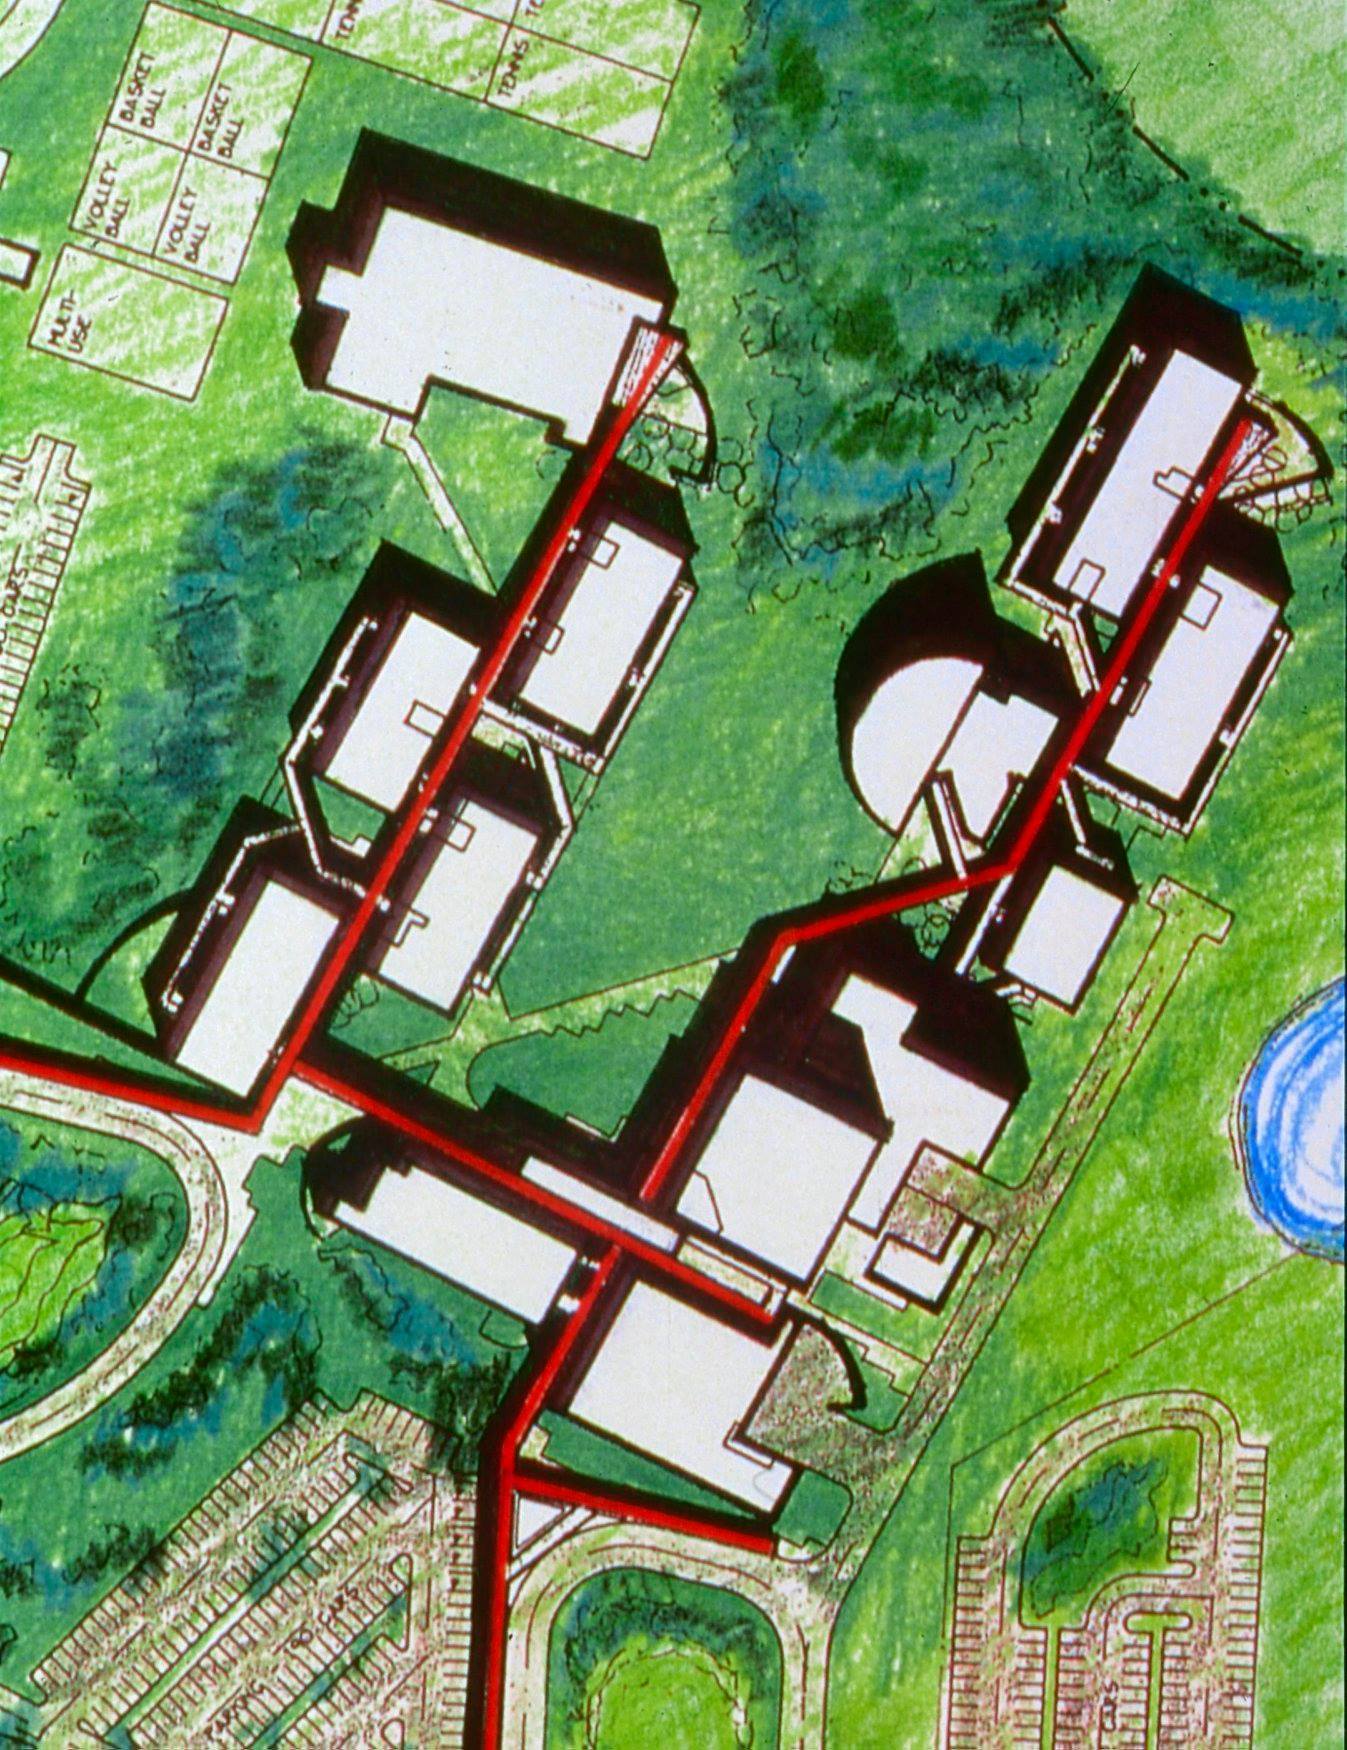 Pine View School was designed in a U shape. Courtesy image